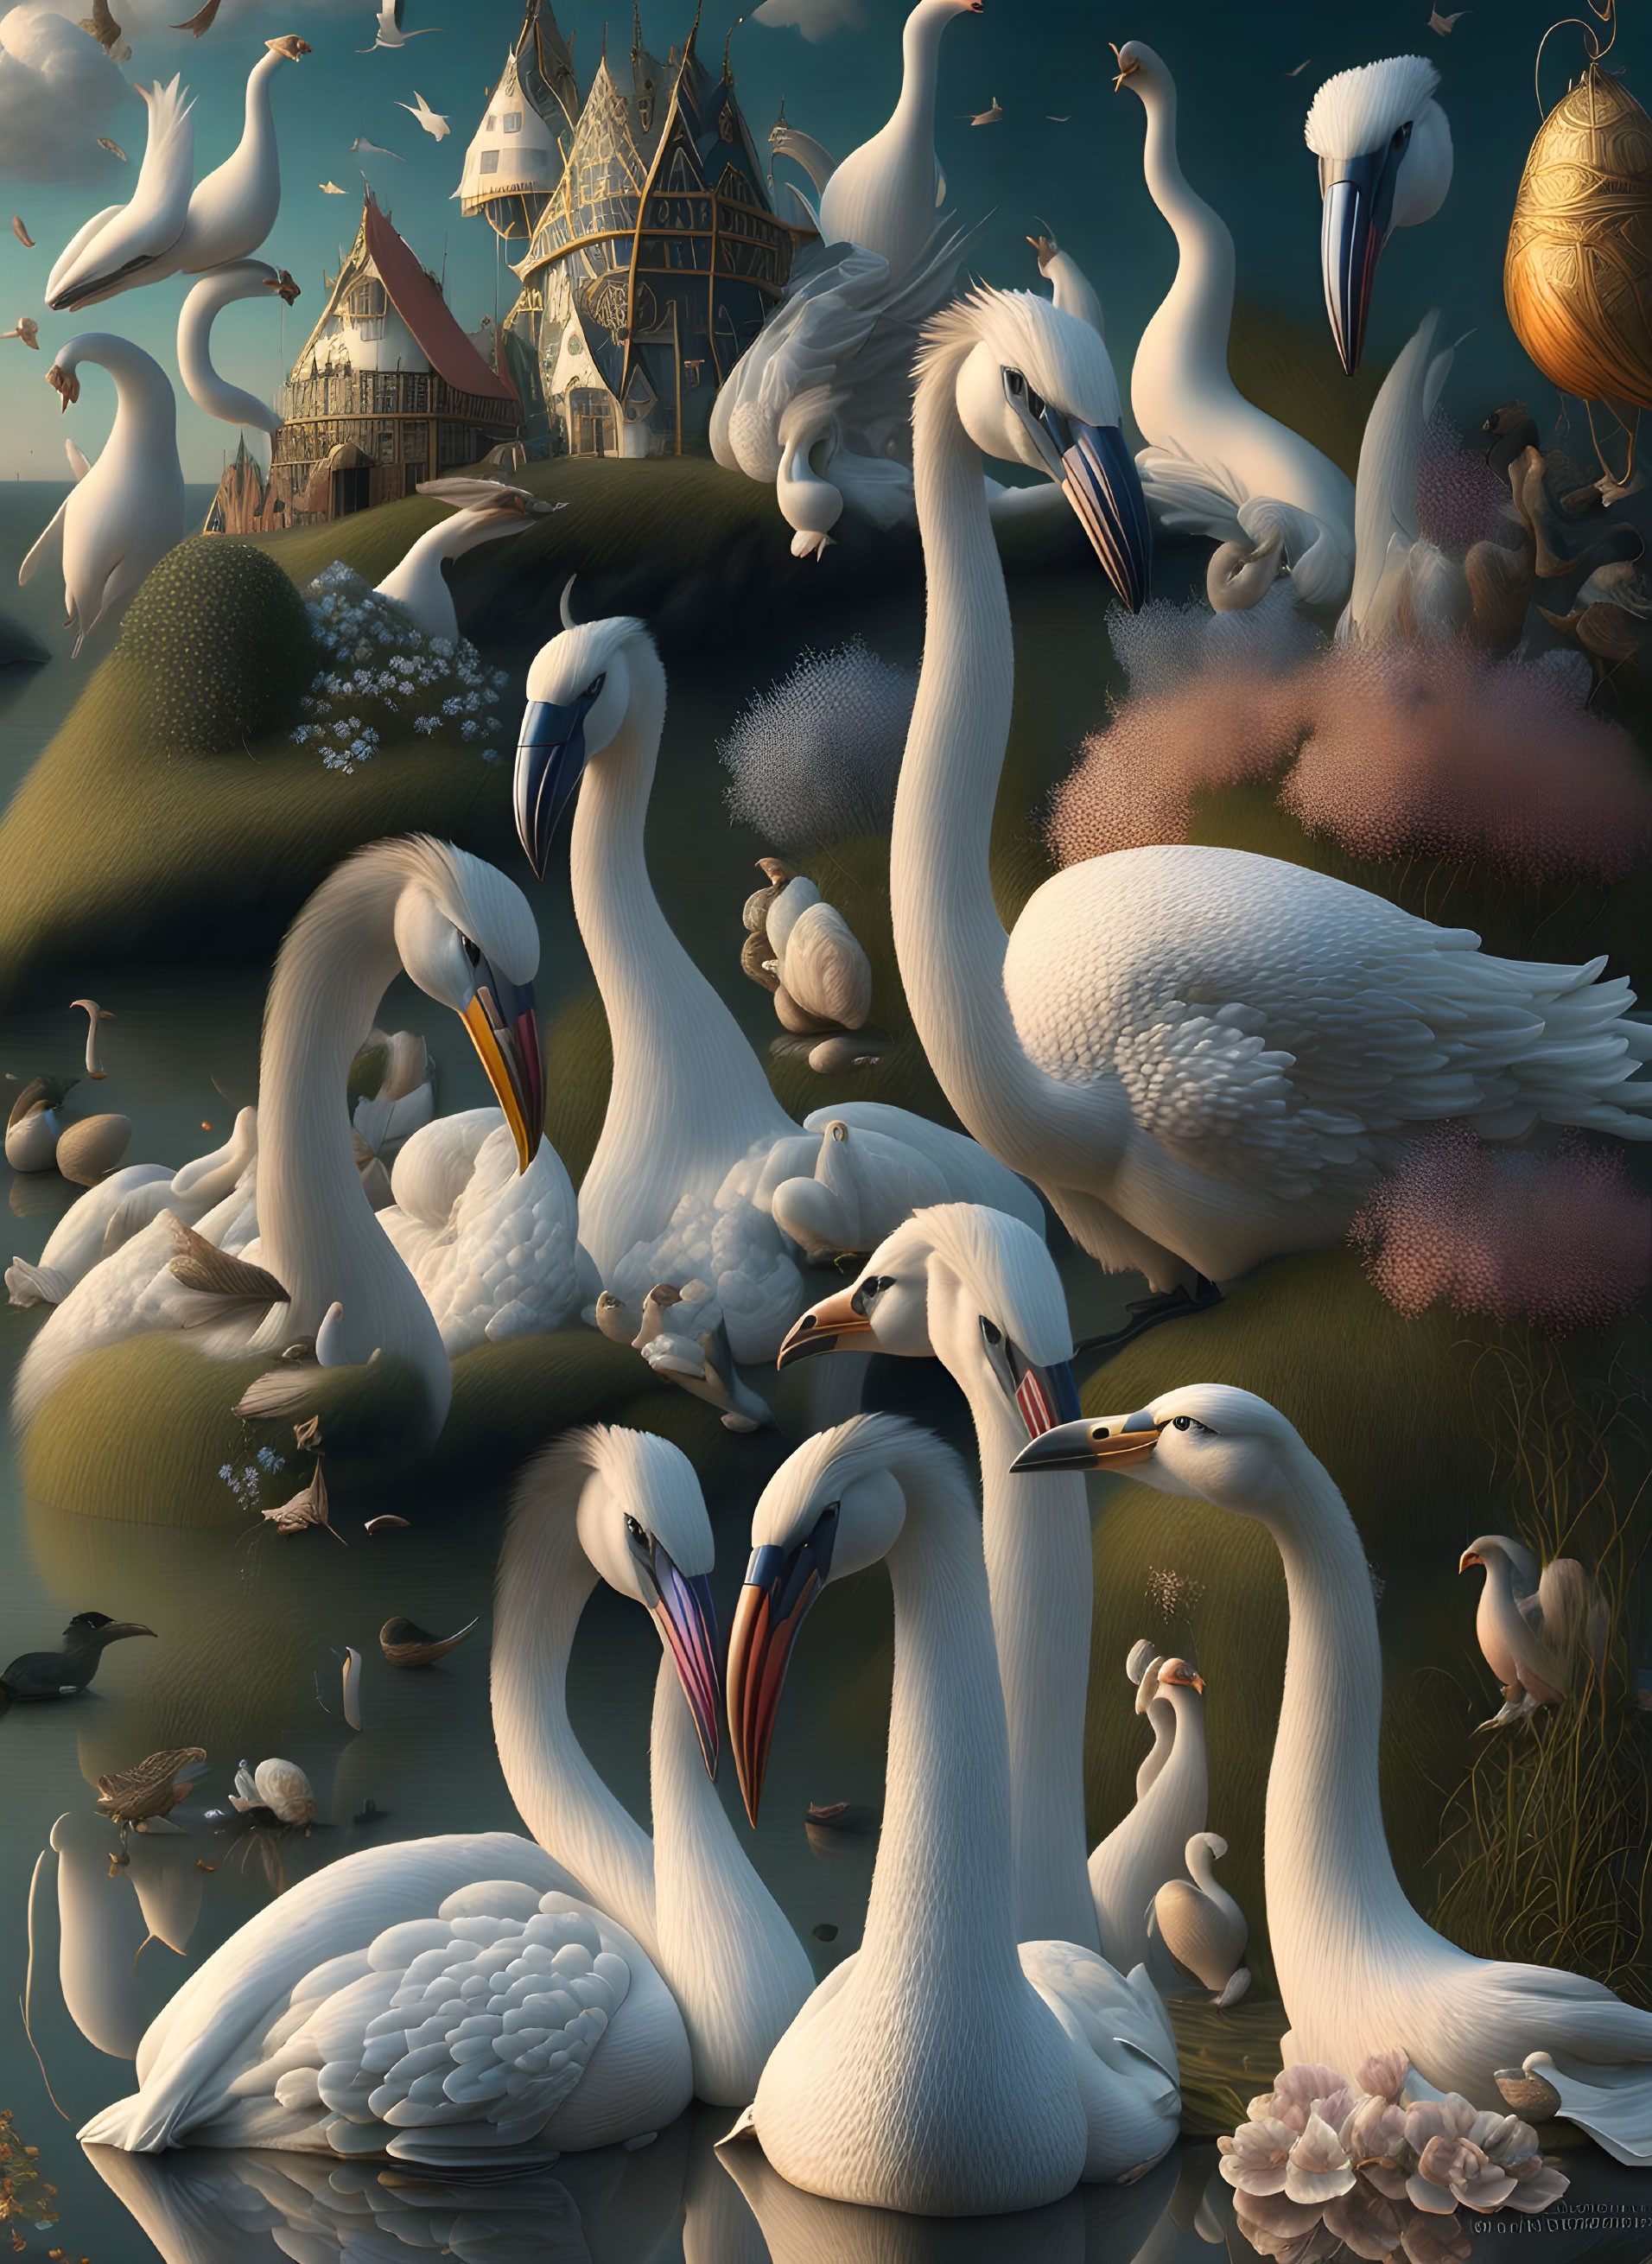 Ethereal scene: Swans, lush greenery, whimsical structures, birds at twilight